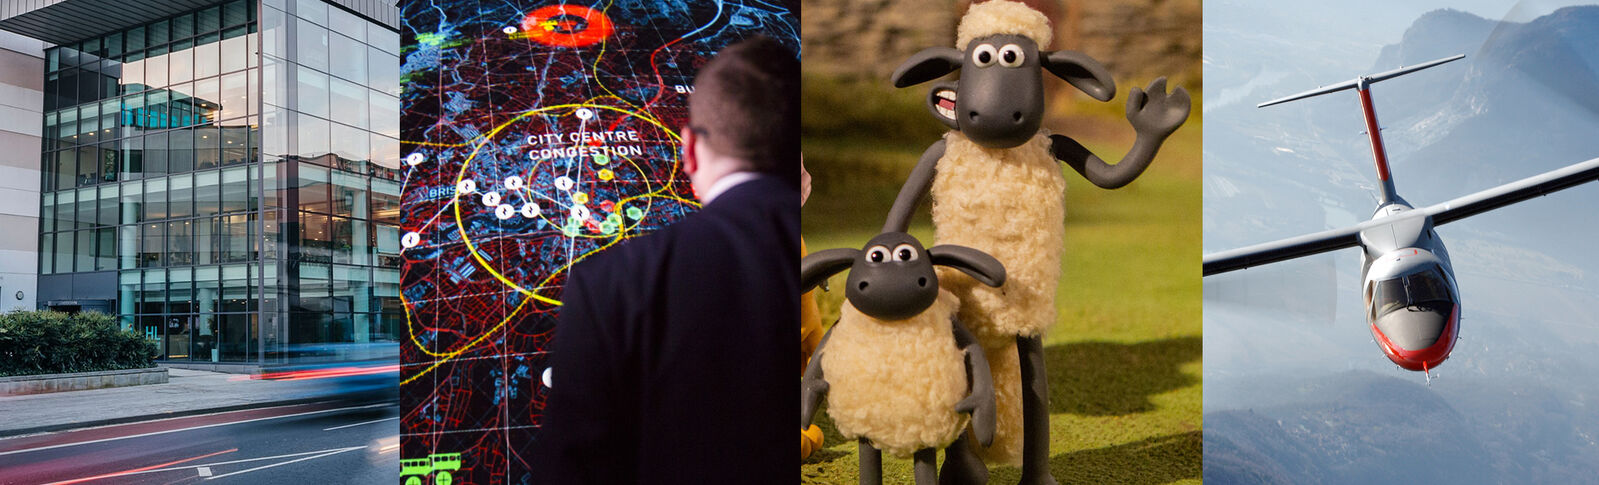 4 images including Shaun the Sheep, Hargreaves Lansdowne building, a man looking at a screen and Vertical Aerospace aircraft